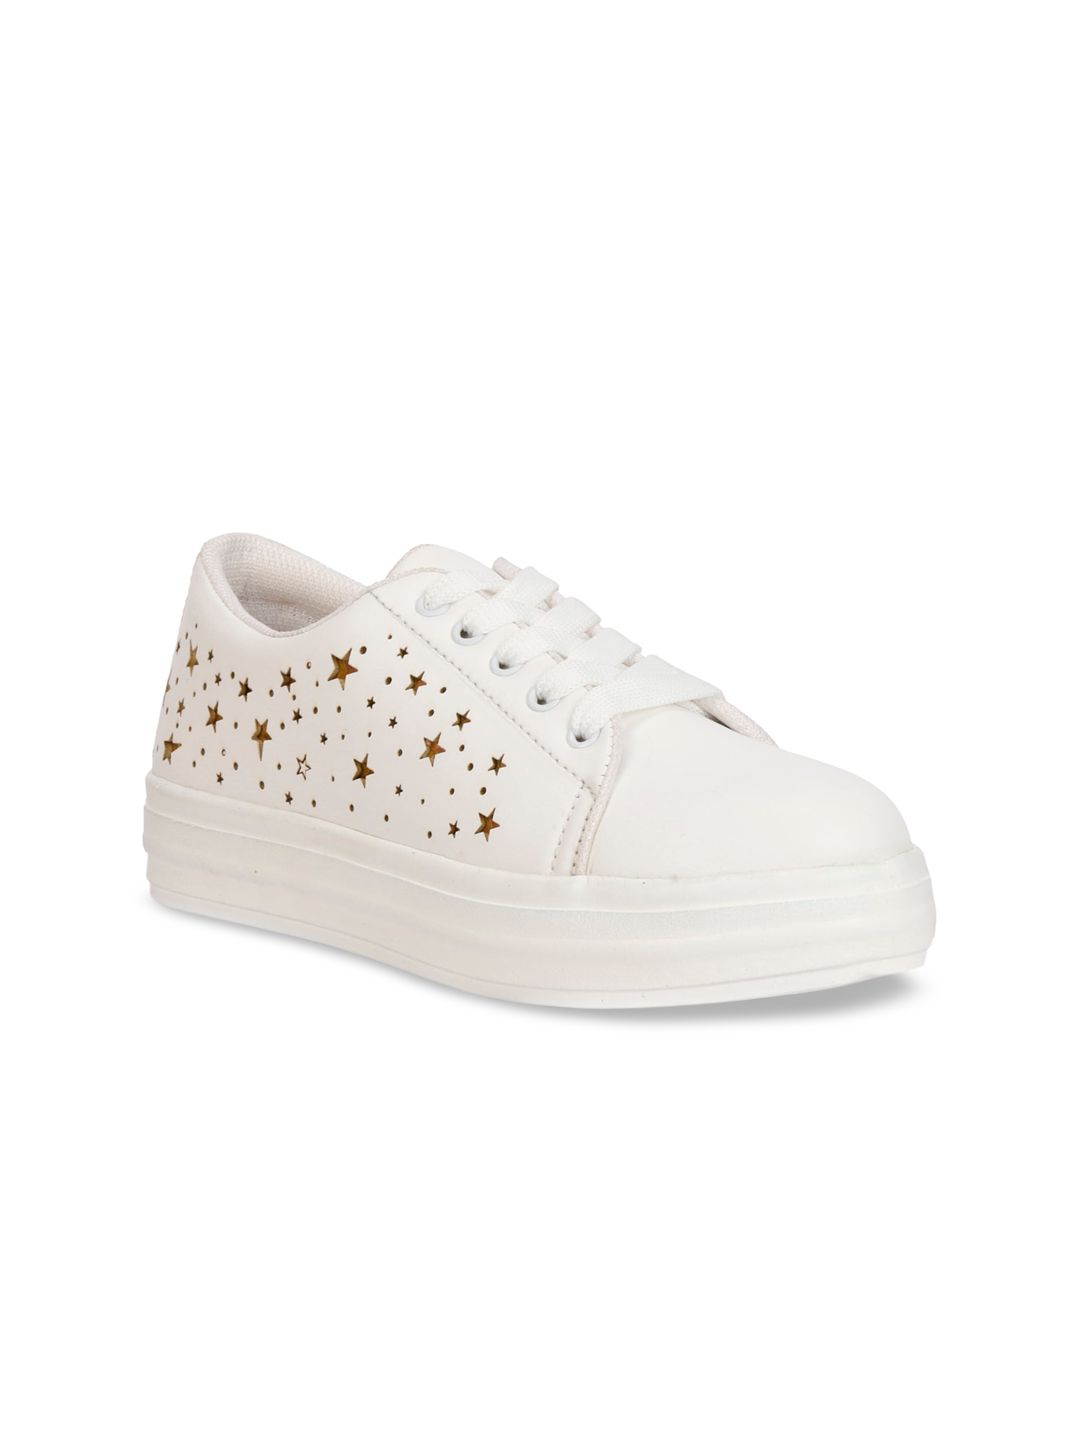 Denill Women White Printed Sneakers Price in India